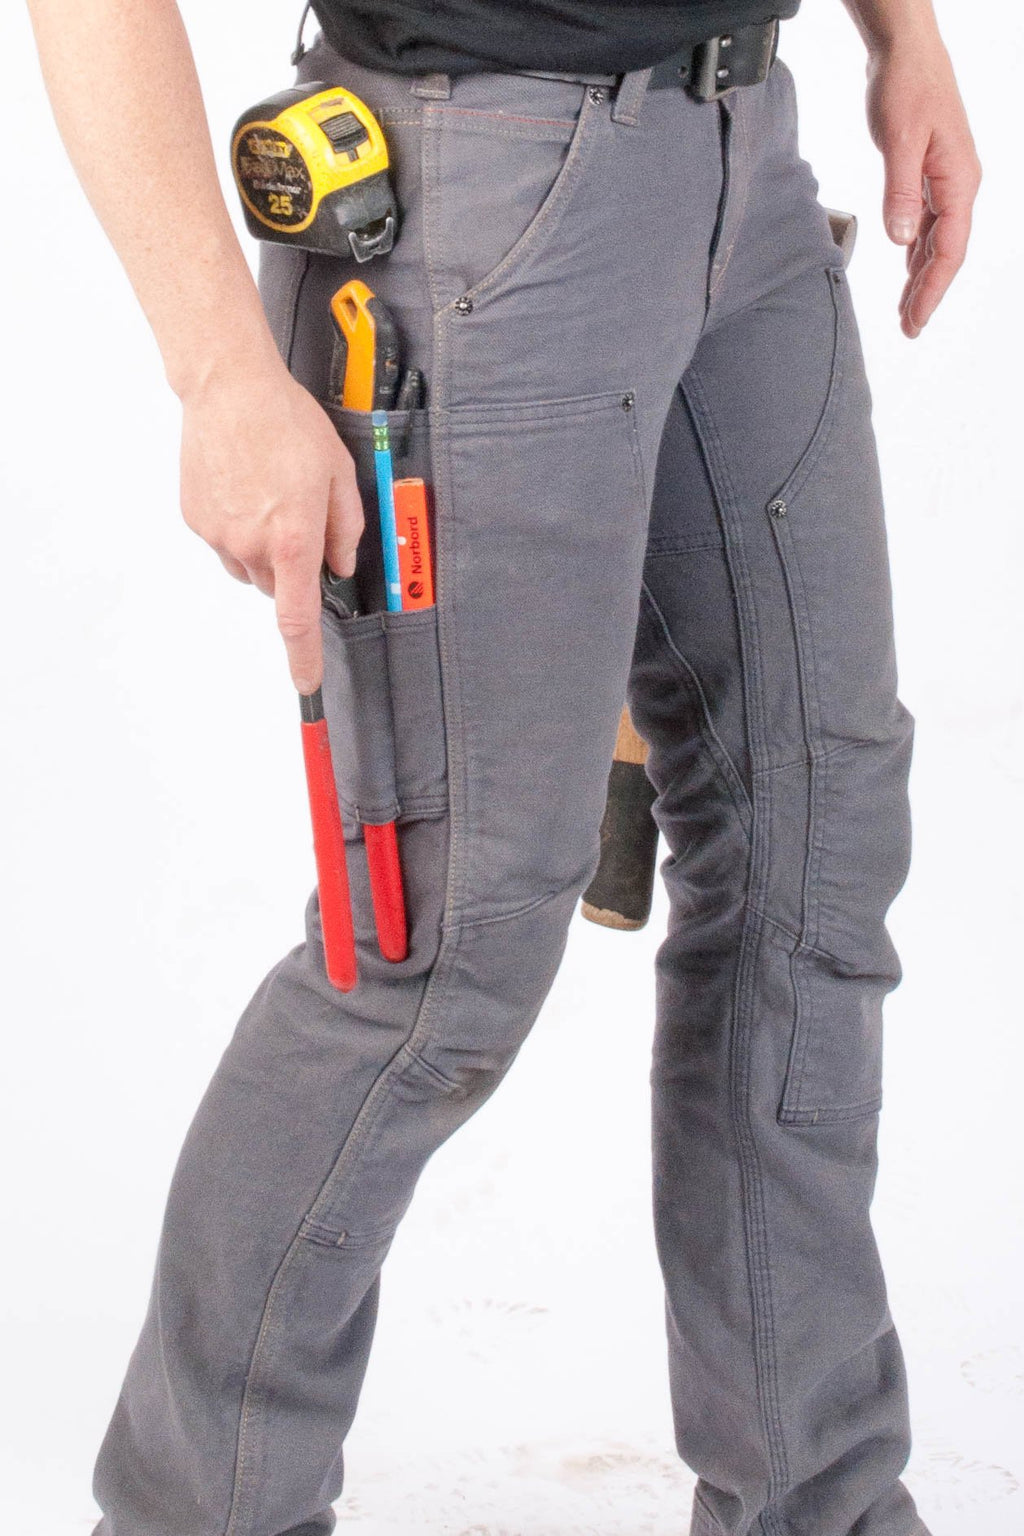 Lower half of Britt Smyton,  the namesake of the Britt Utility pant she is wearing. The Britt Utility Workpant for Women in Grey Stretch Canvas has a measuring tape, penci, plyers, hammer, and multiple tools in her side pockets on the right. On the left, the handle of a has a hammer can be seen popping out from The Britt Utility's modified hammer loop. 